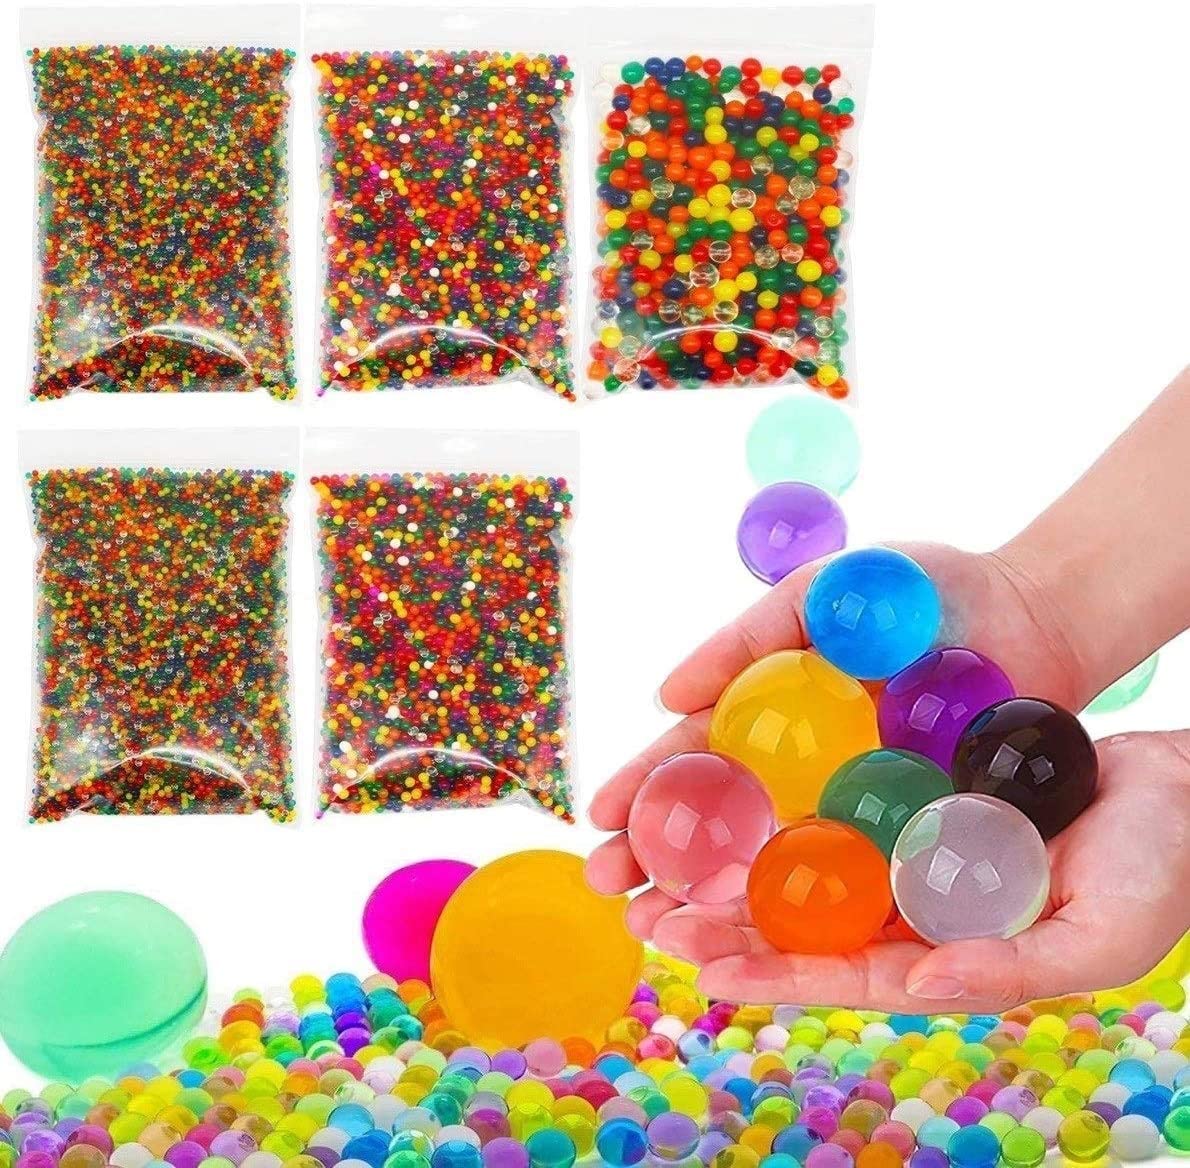 OIG Brands Water Beads for Kids 20,000 Pack Vase Fillers and Spa Non-Toxic Growing Gel Balls for Home Decoration 